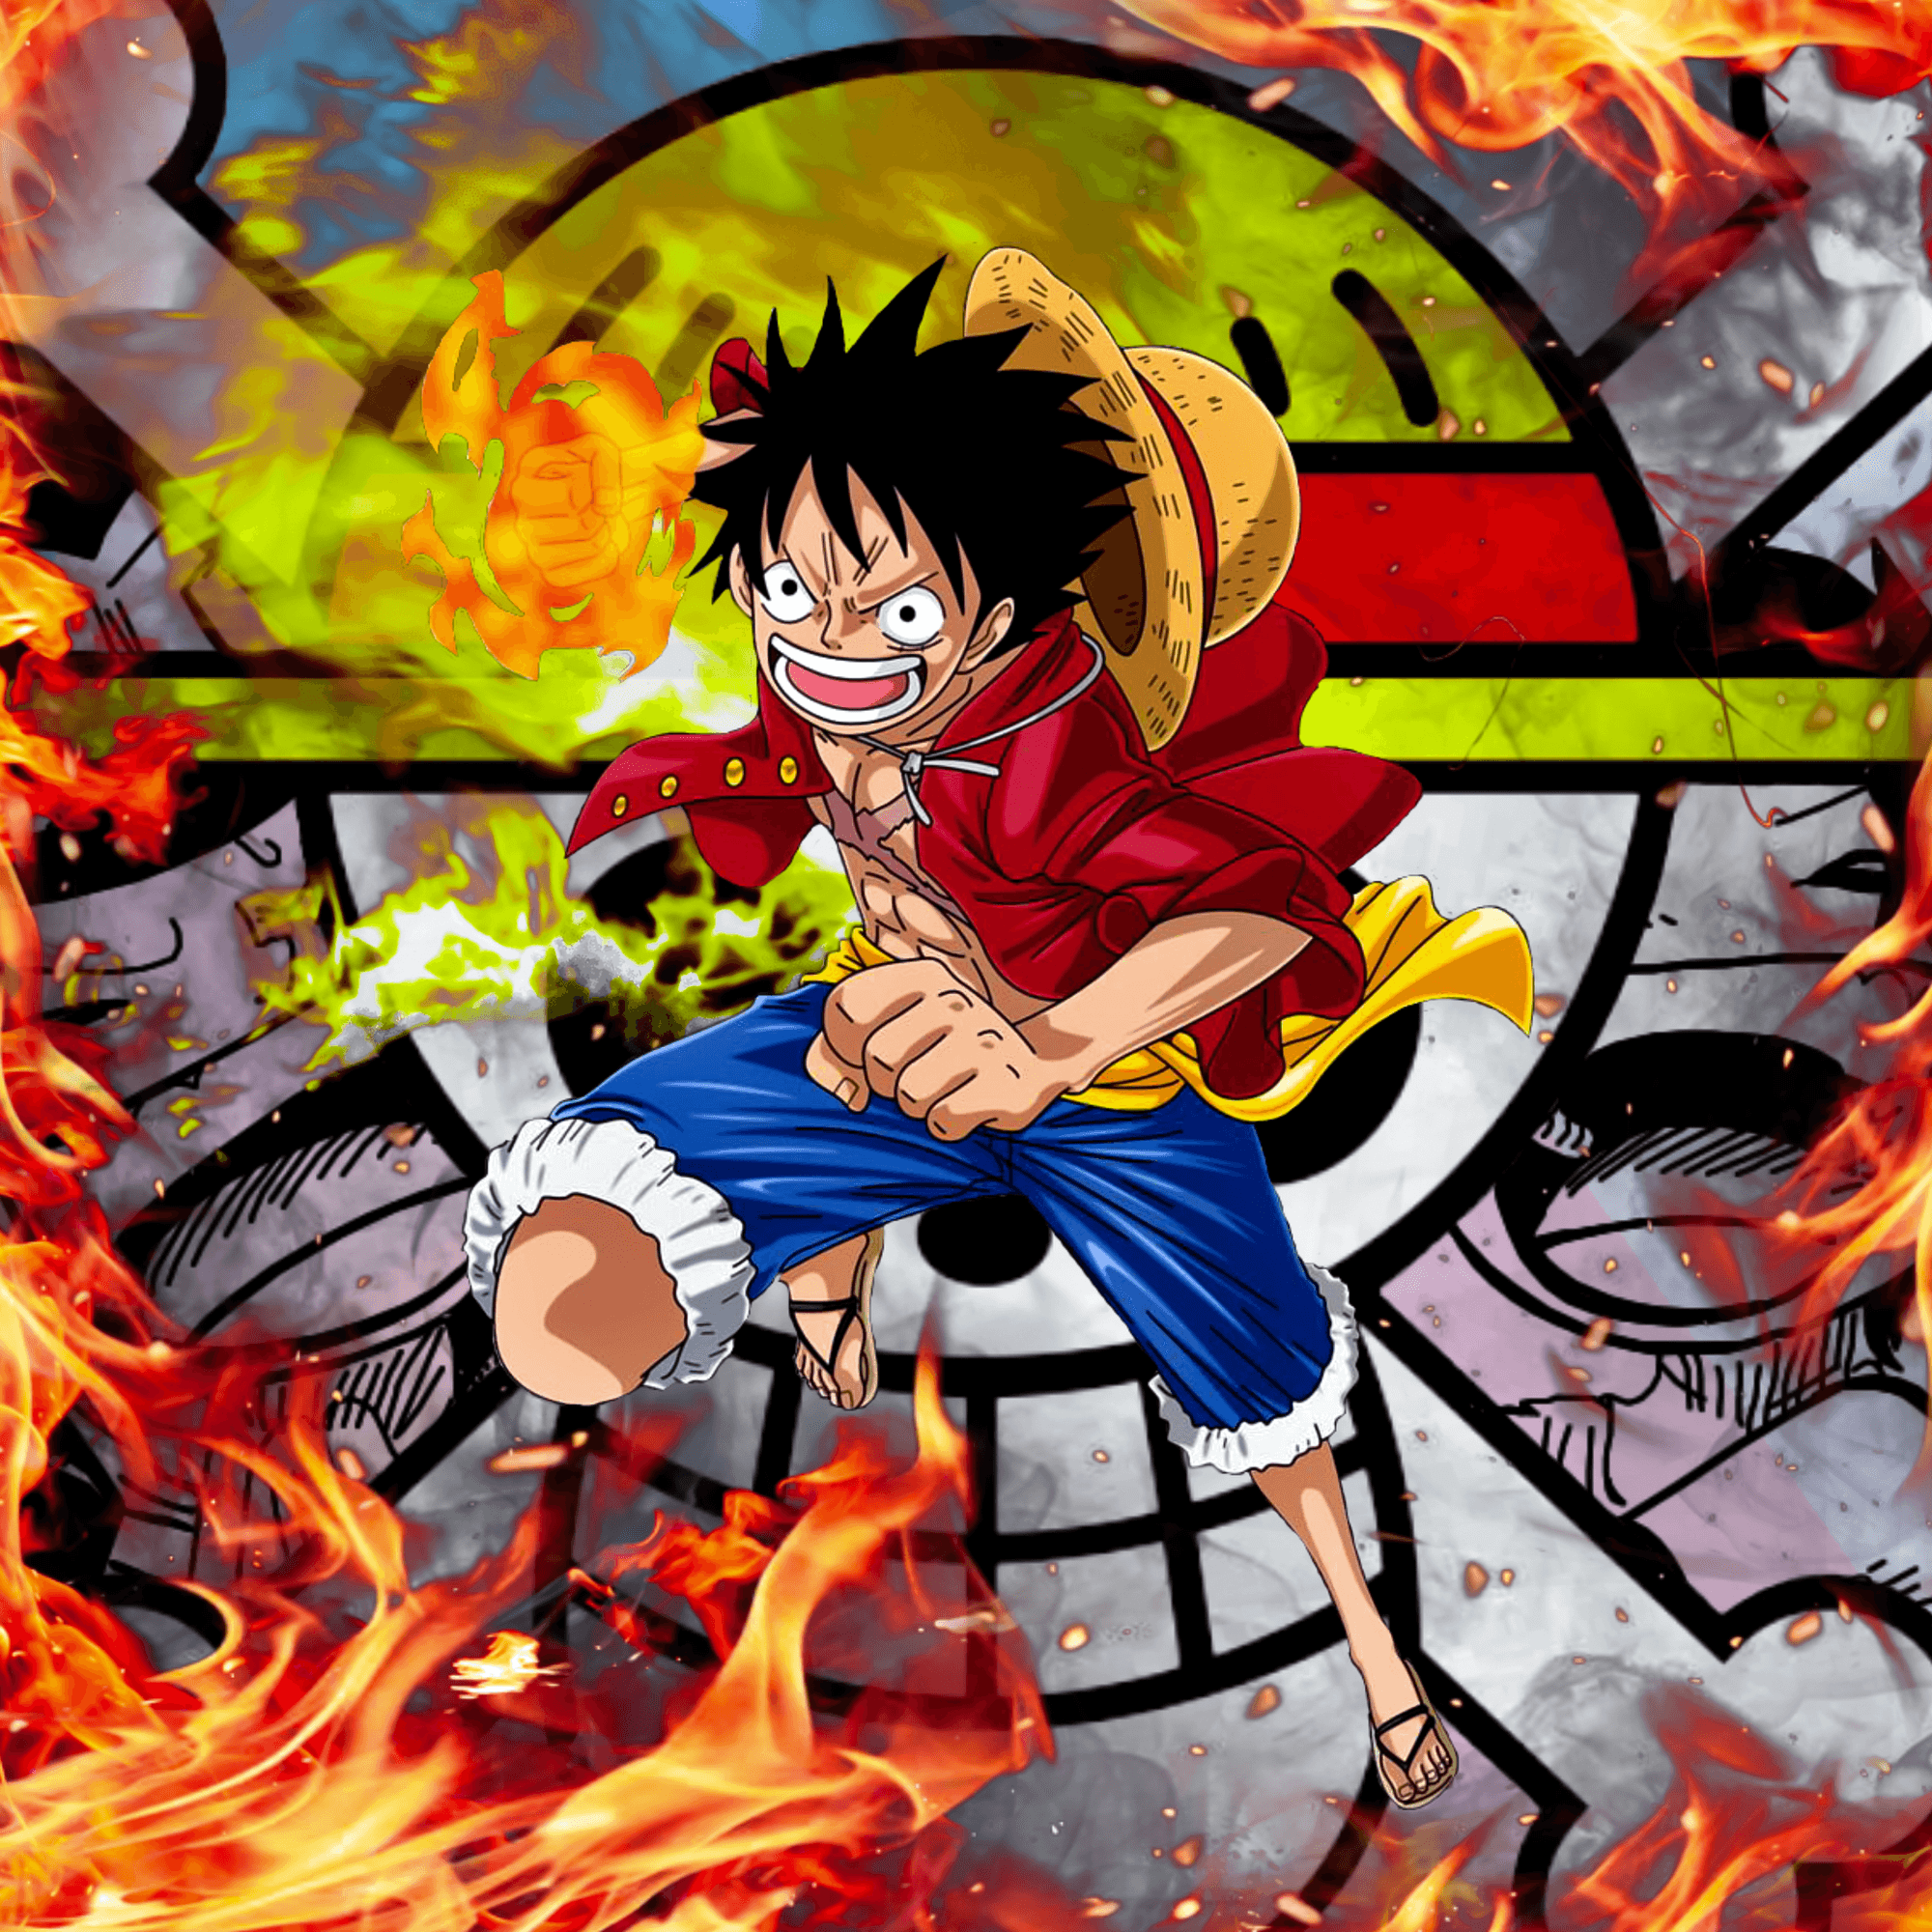 Legend Pirate Luffy Oil Painted, One Piece - Anime Legendary NFT Heroes